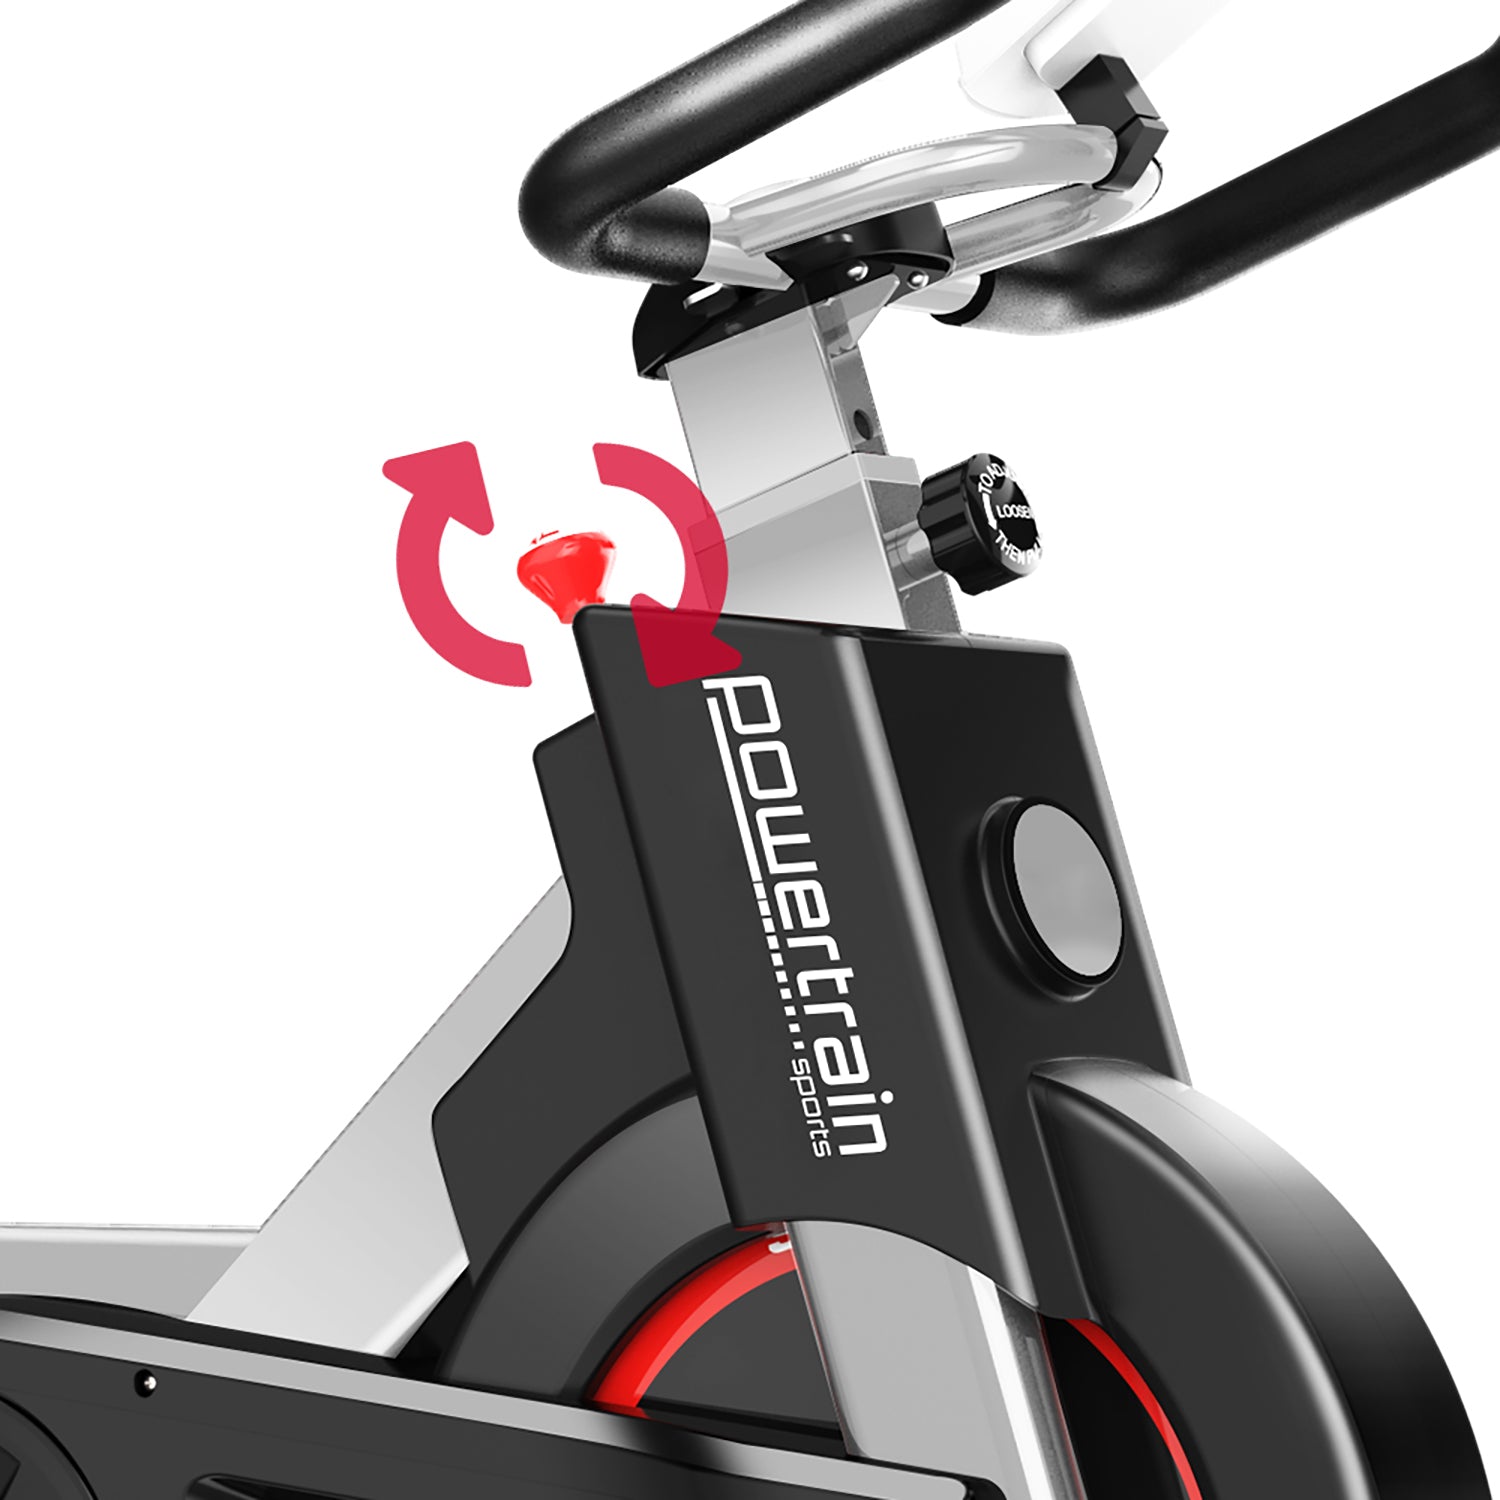 Powertrain IS-500 Heavy-Duty Exercise Spin Bike Electroplated - Silver-Sports &amp; Fitness &gt; Bikes &amp; Accessories-PEROZ Accessories